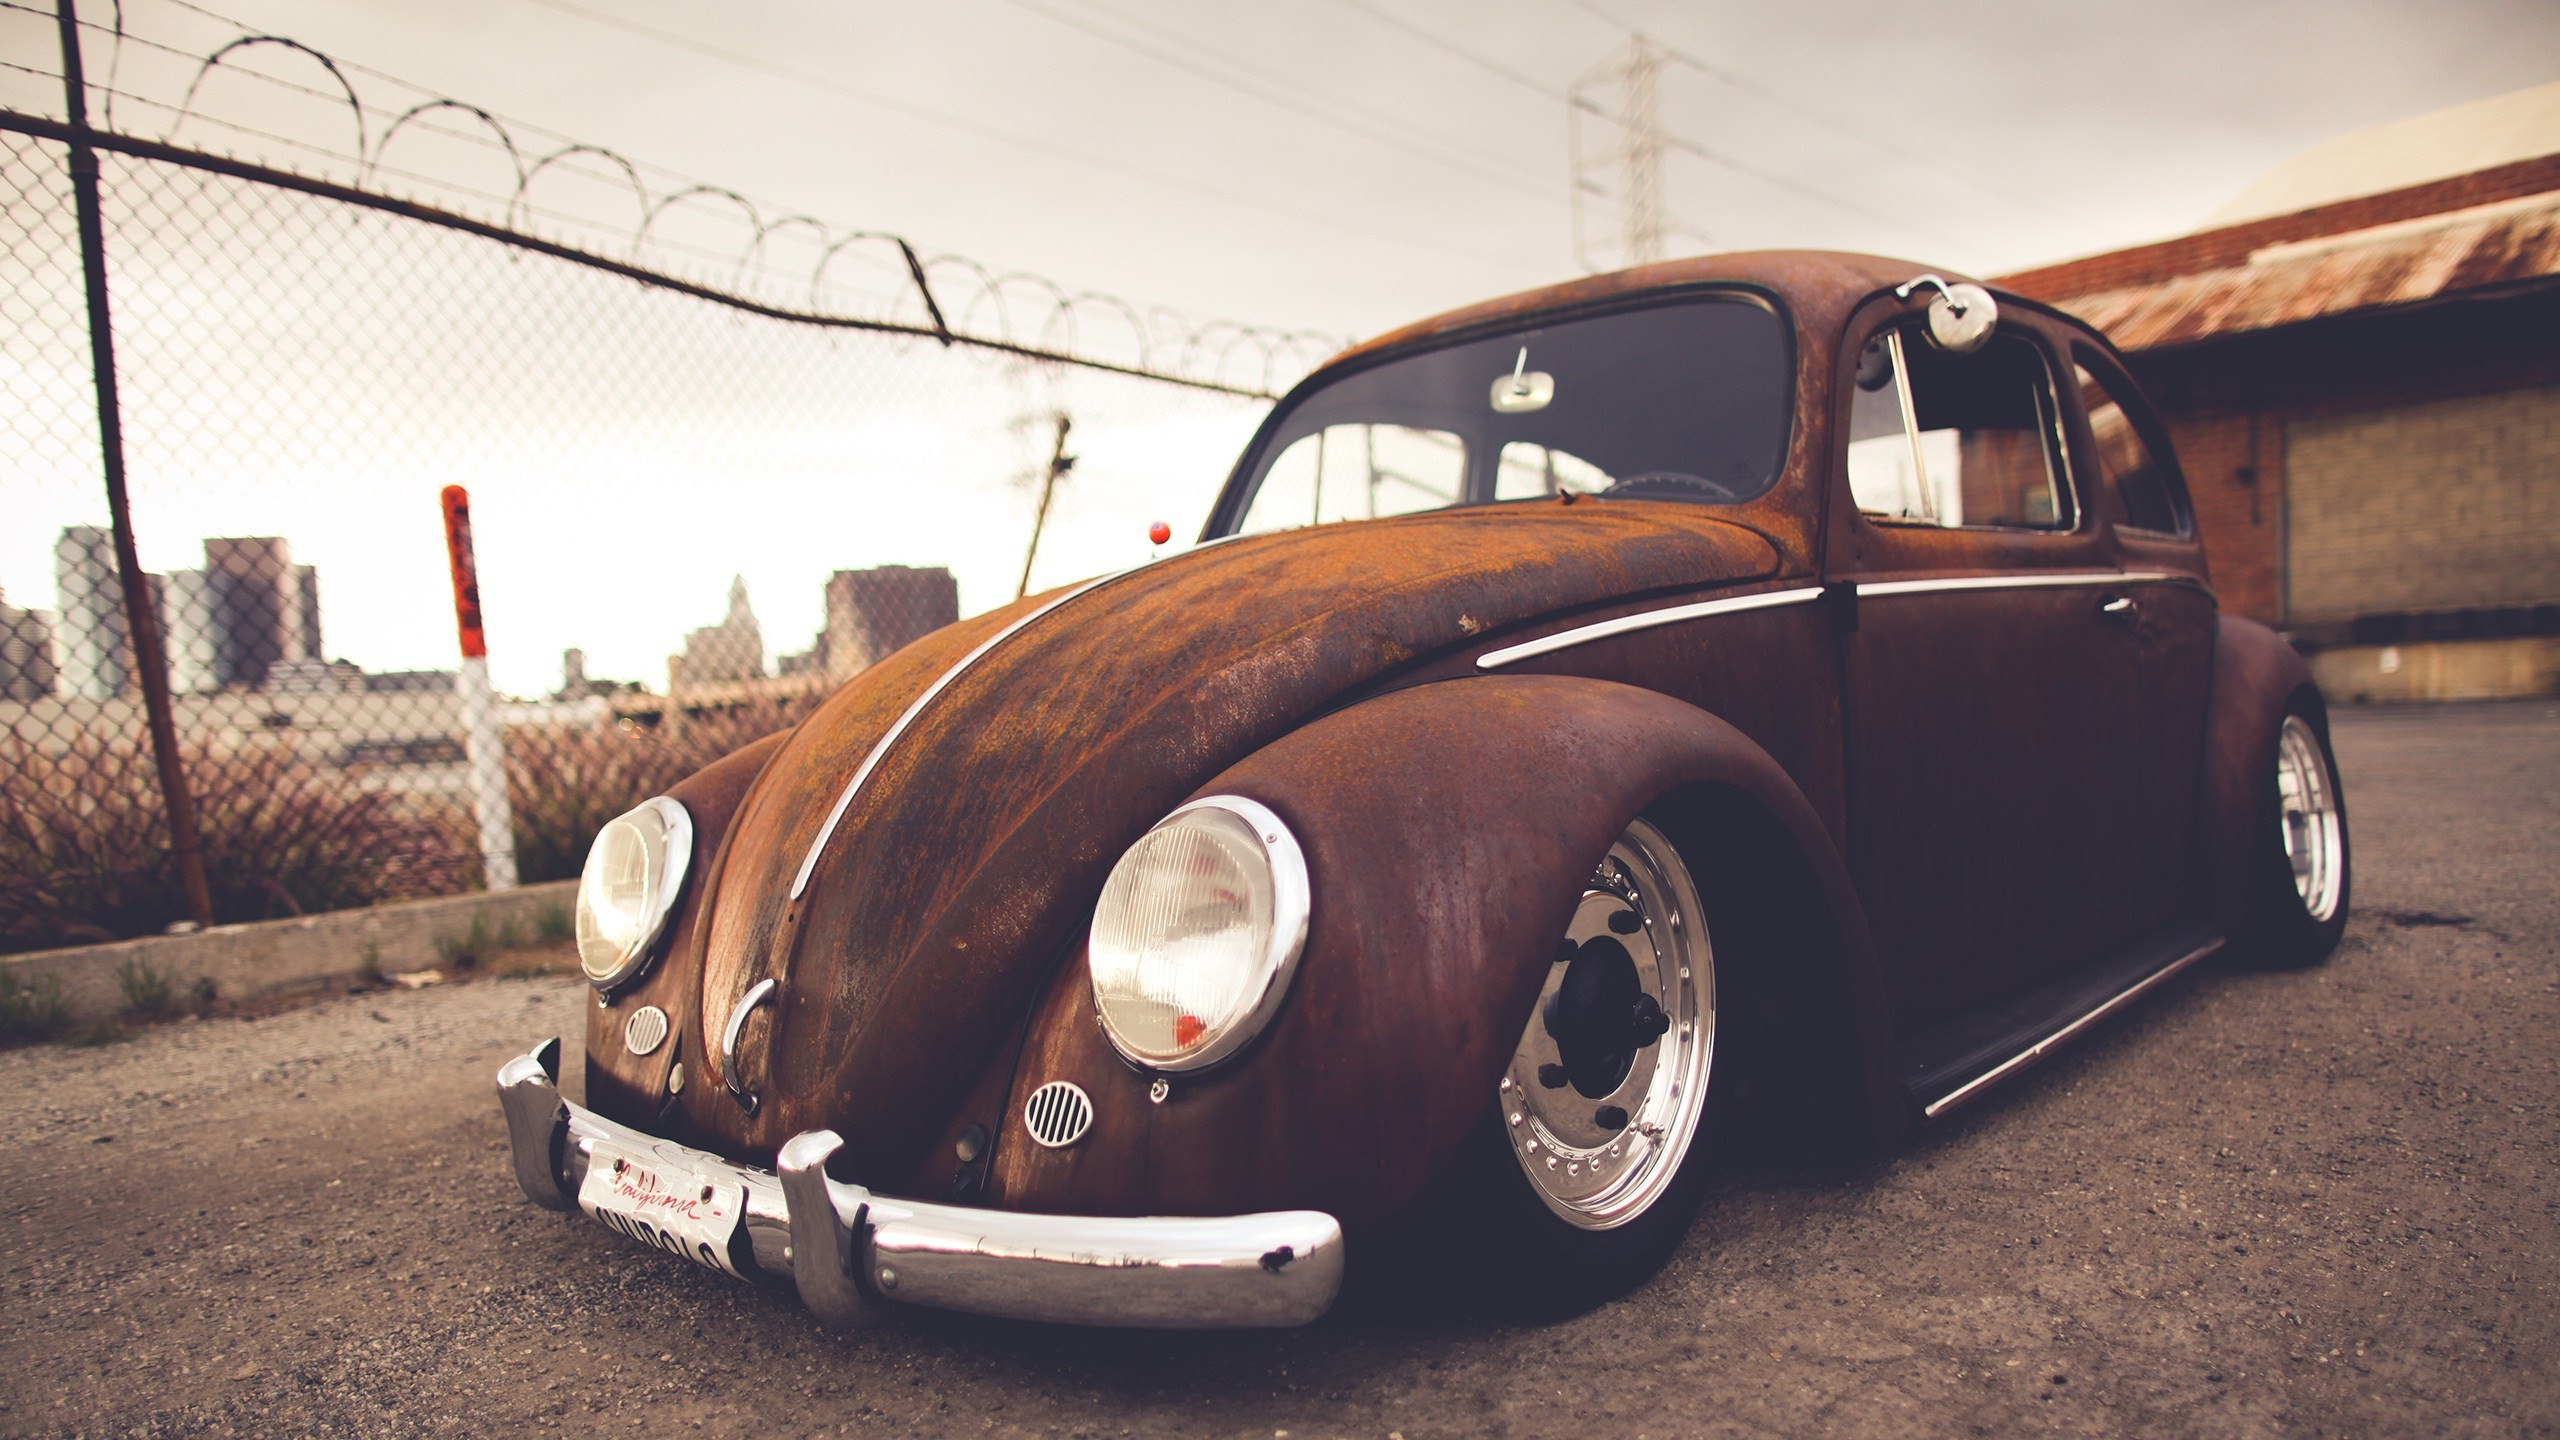 Brown Vintage Car on Gray Concrete Ground. Wallpaper in 2560x1440 Resolution